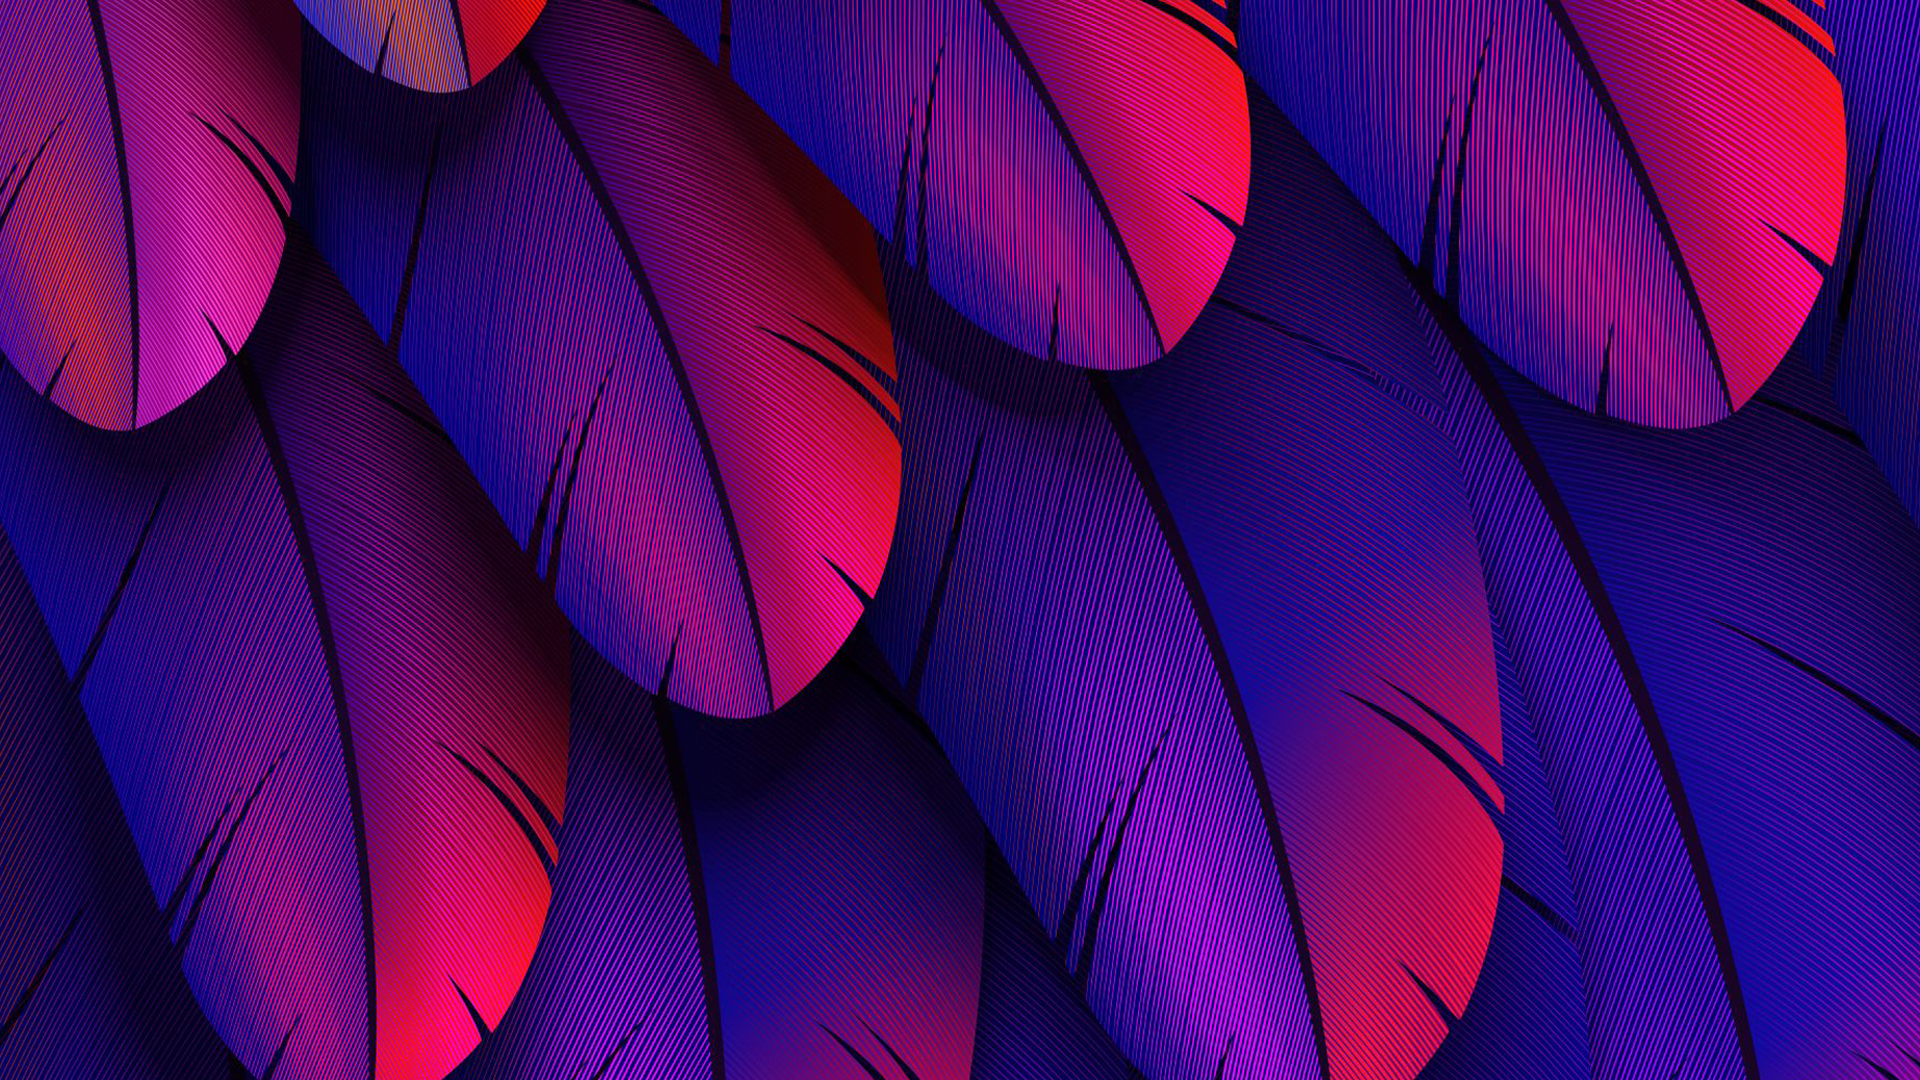 General 1920x1080 abstract feathers texture colorful artwork purple